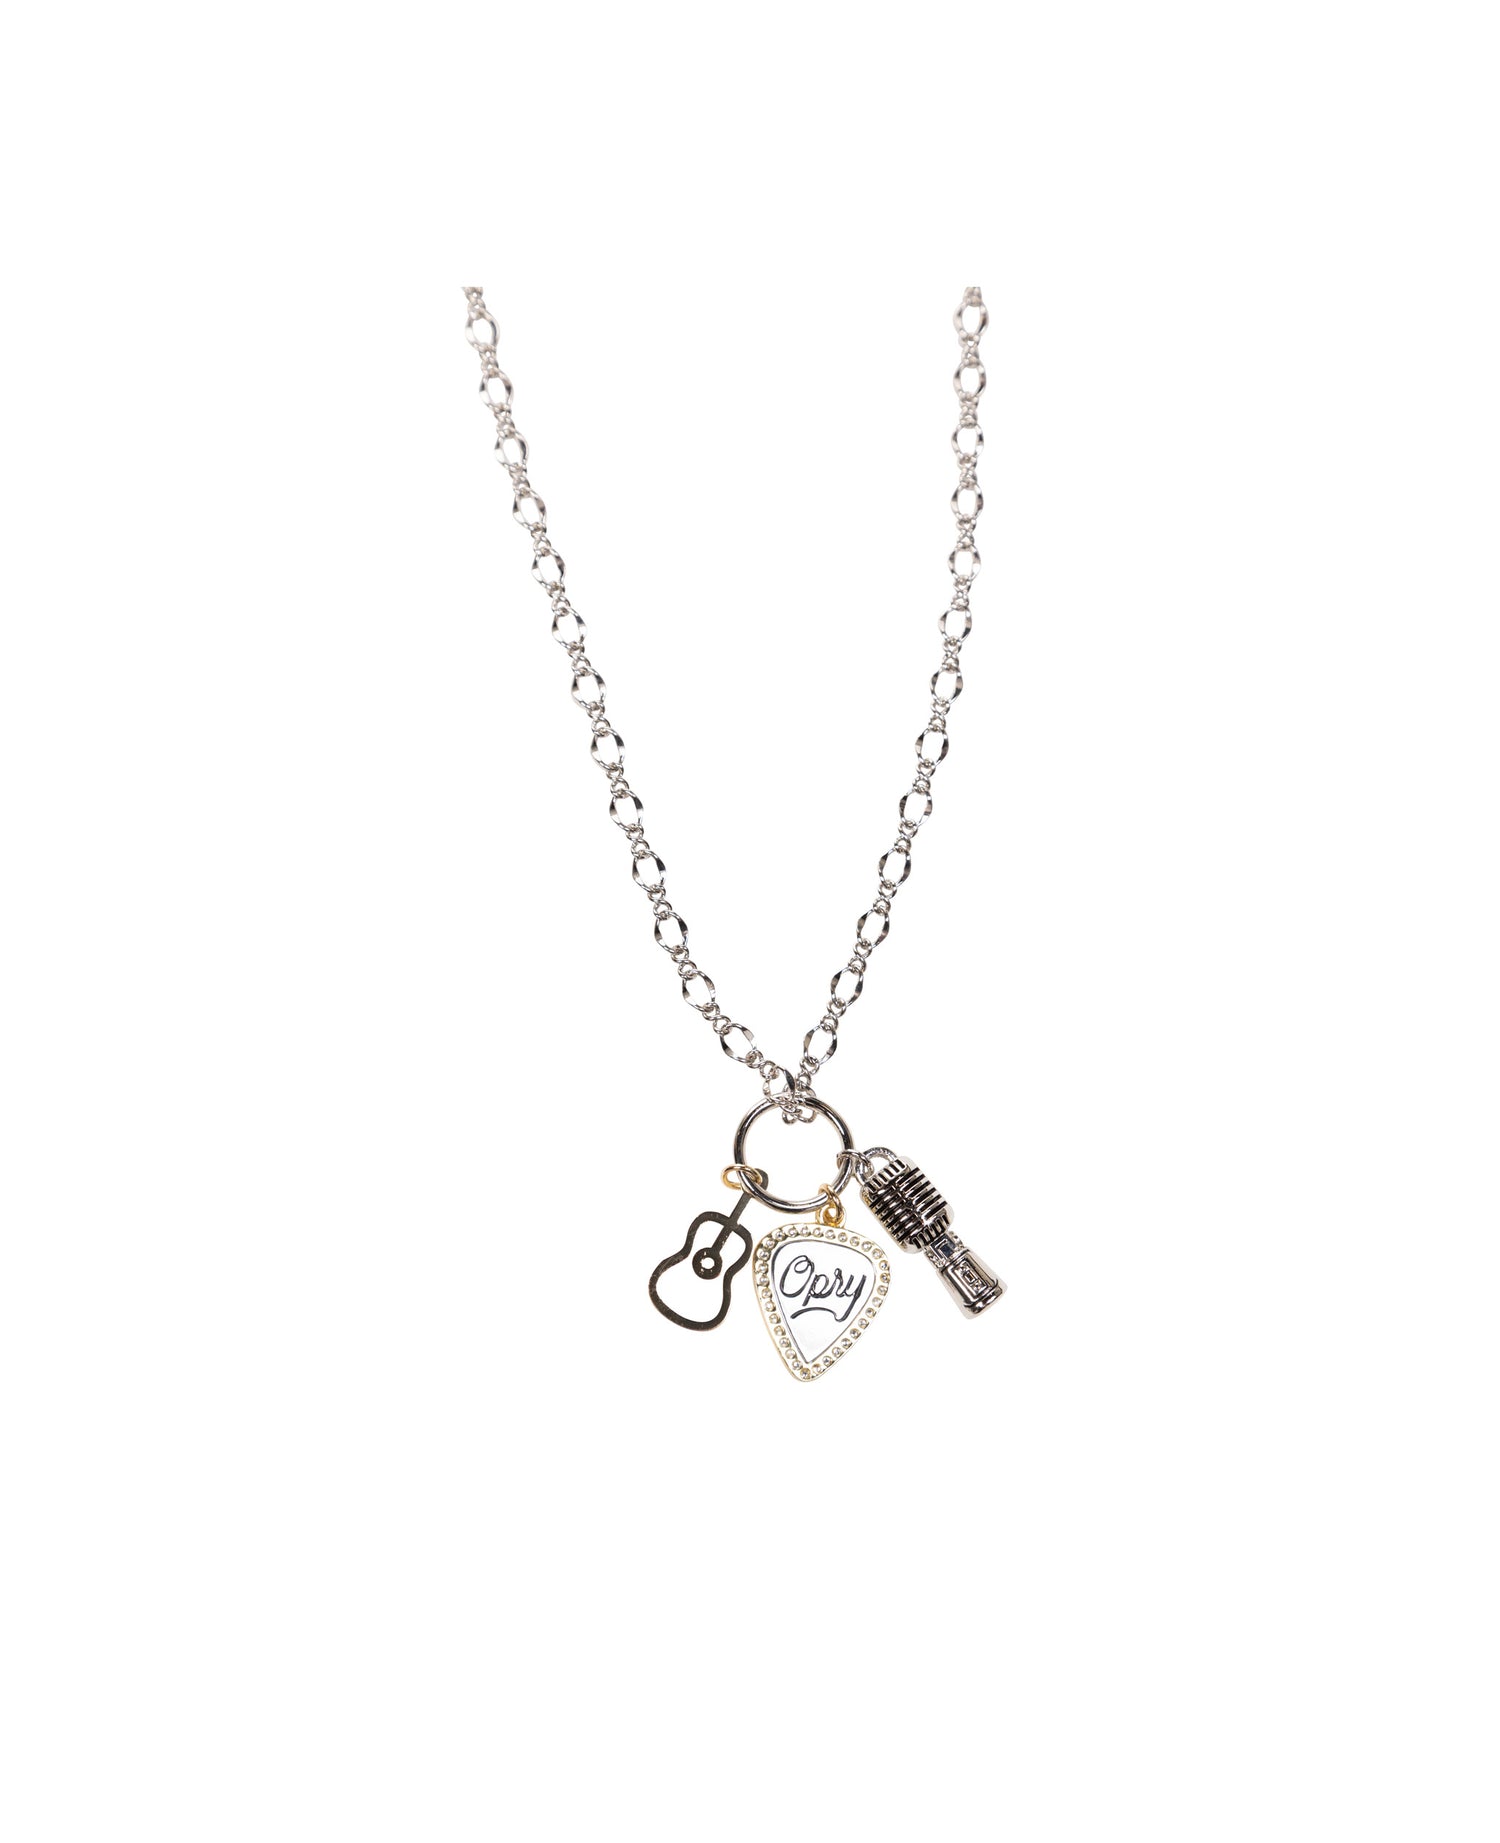 Opry Mixed Metal Charm Necklace